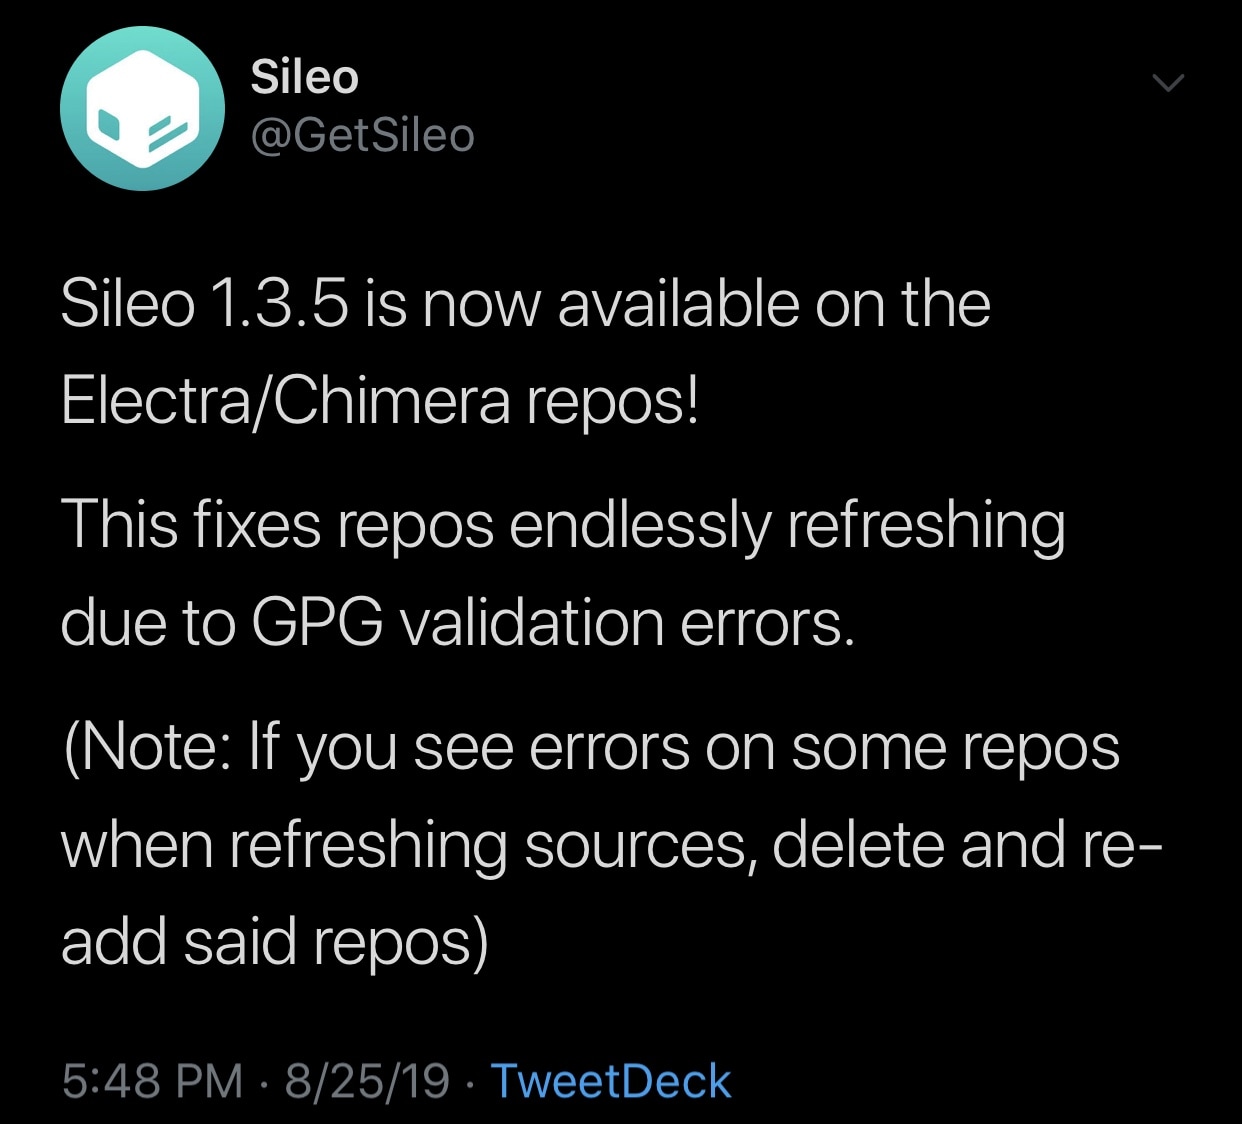 Sileo 1.3.5 Jailbreak is now available on the Electra/Chimera repos